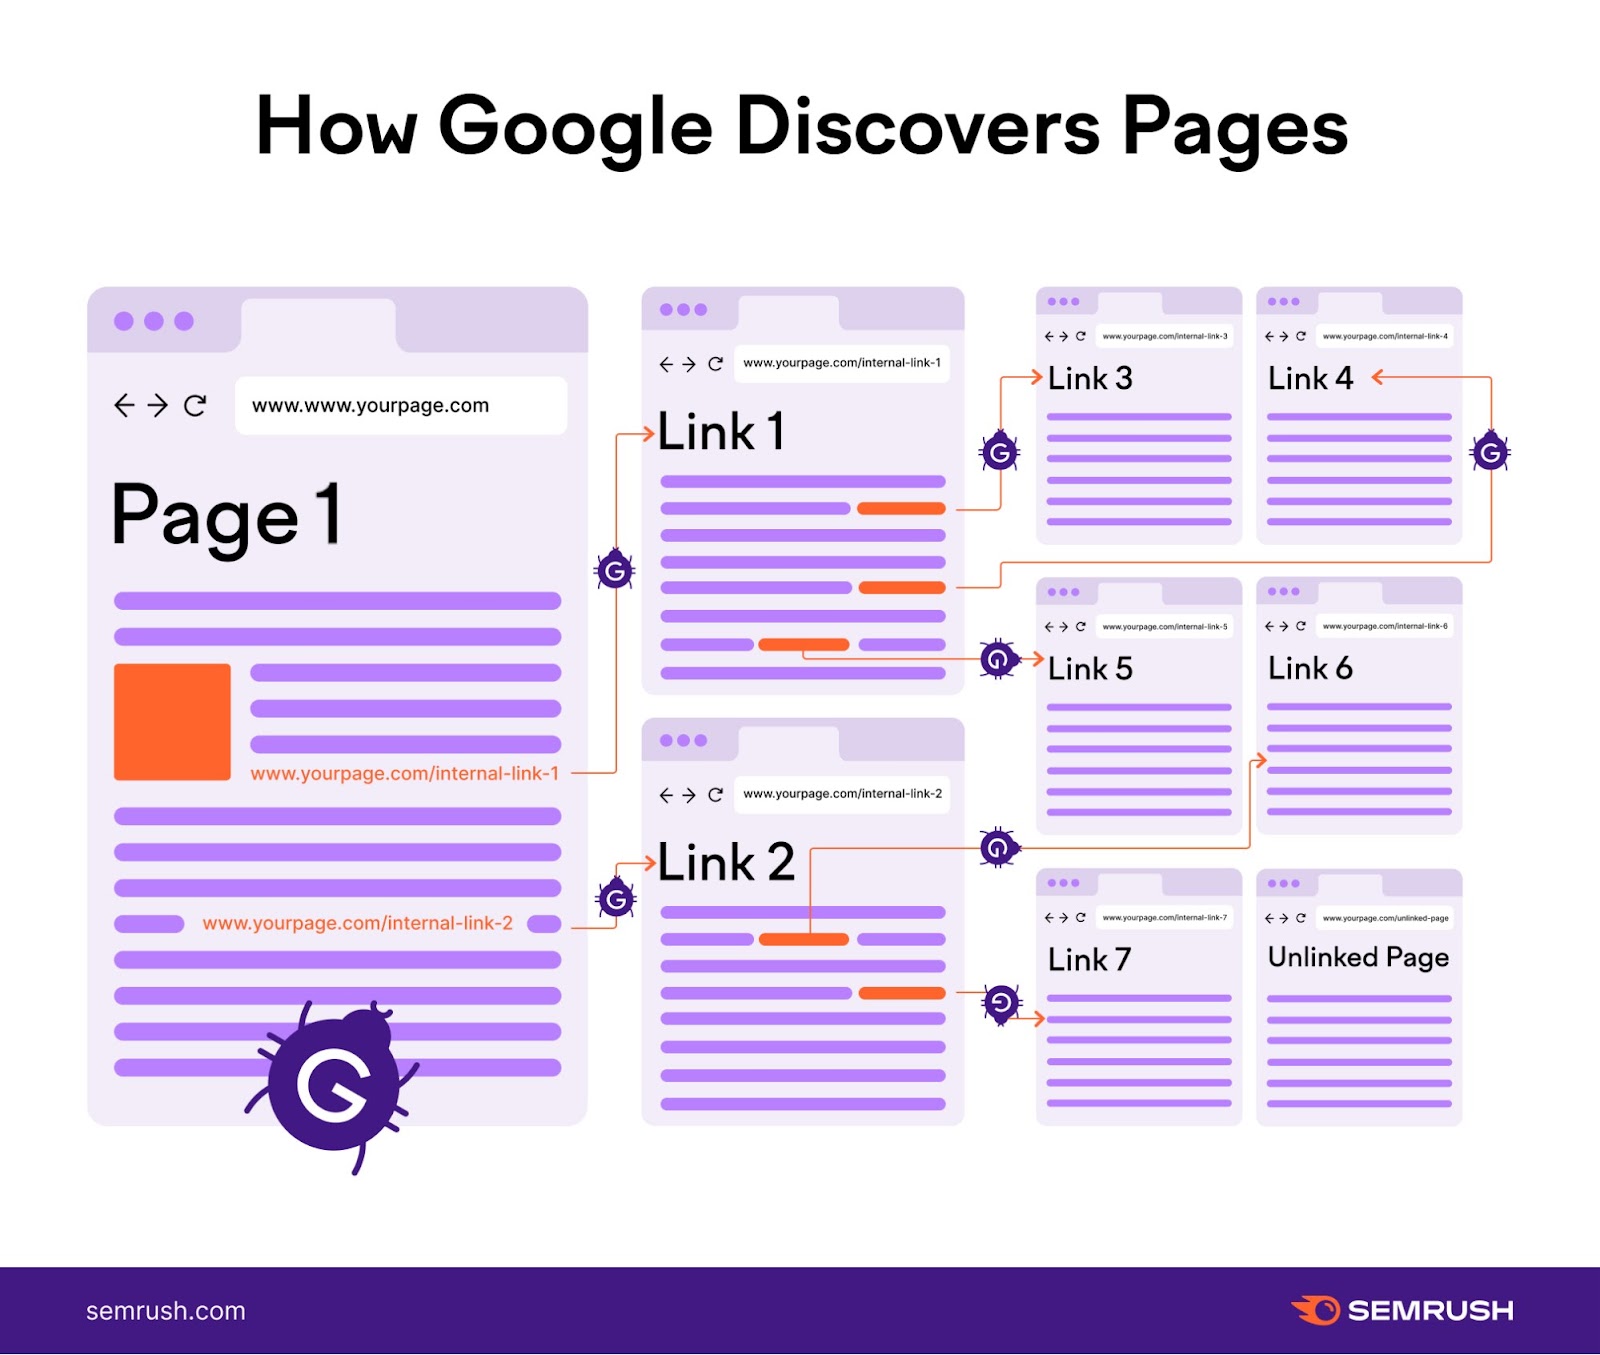 An infographic s،wing ،w Google discovers pages